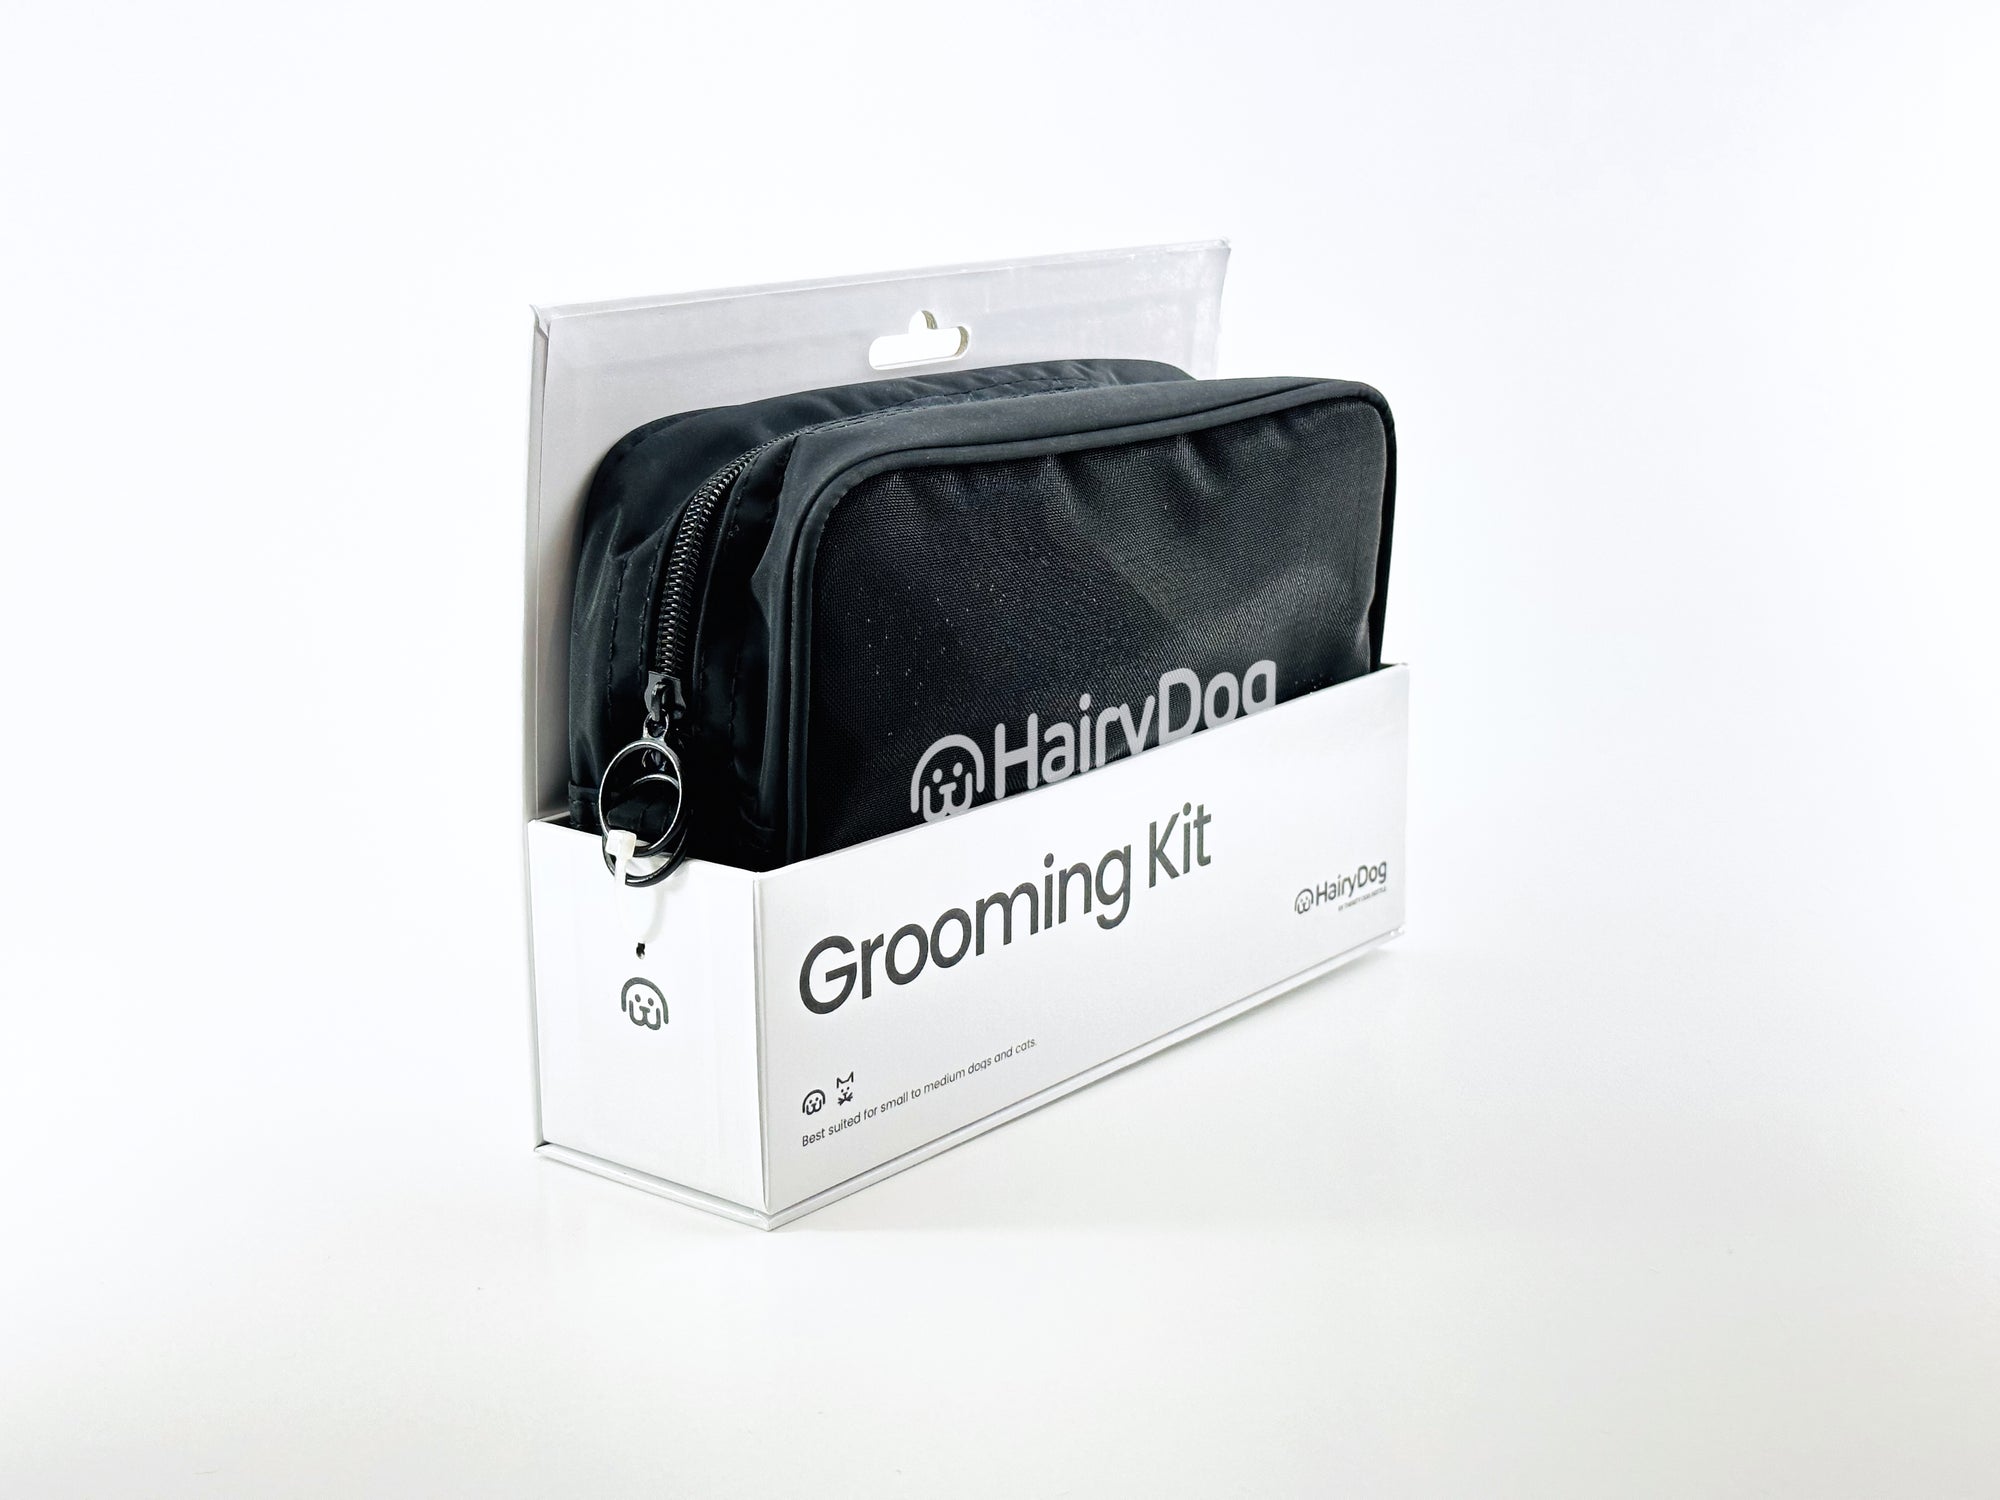 The Hairy Dog Grooming Kit